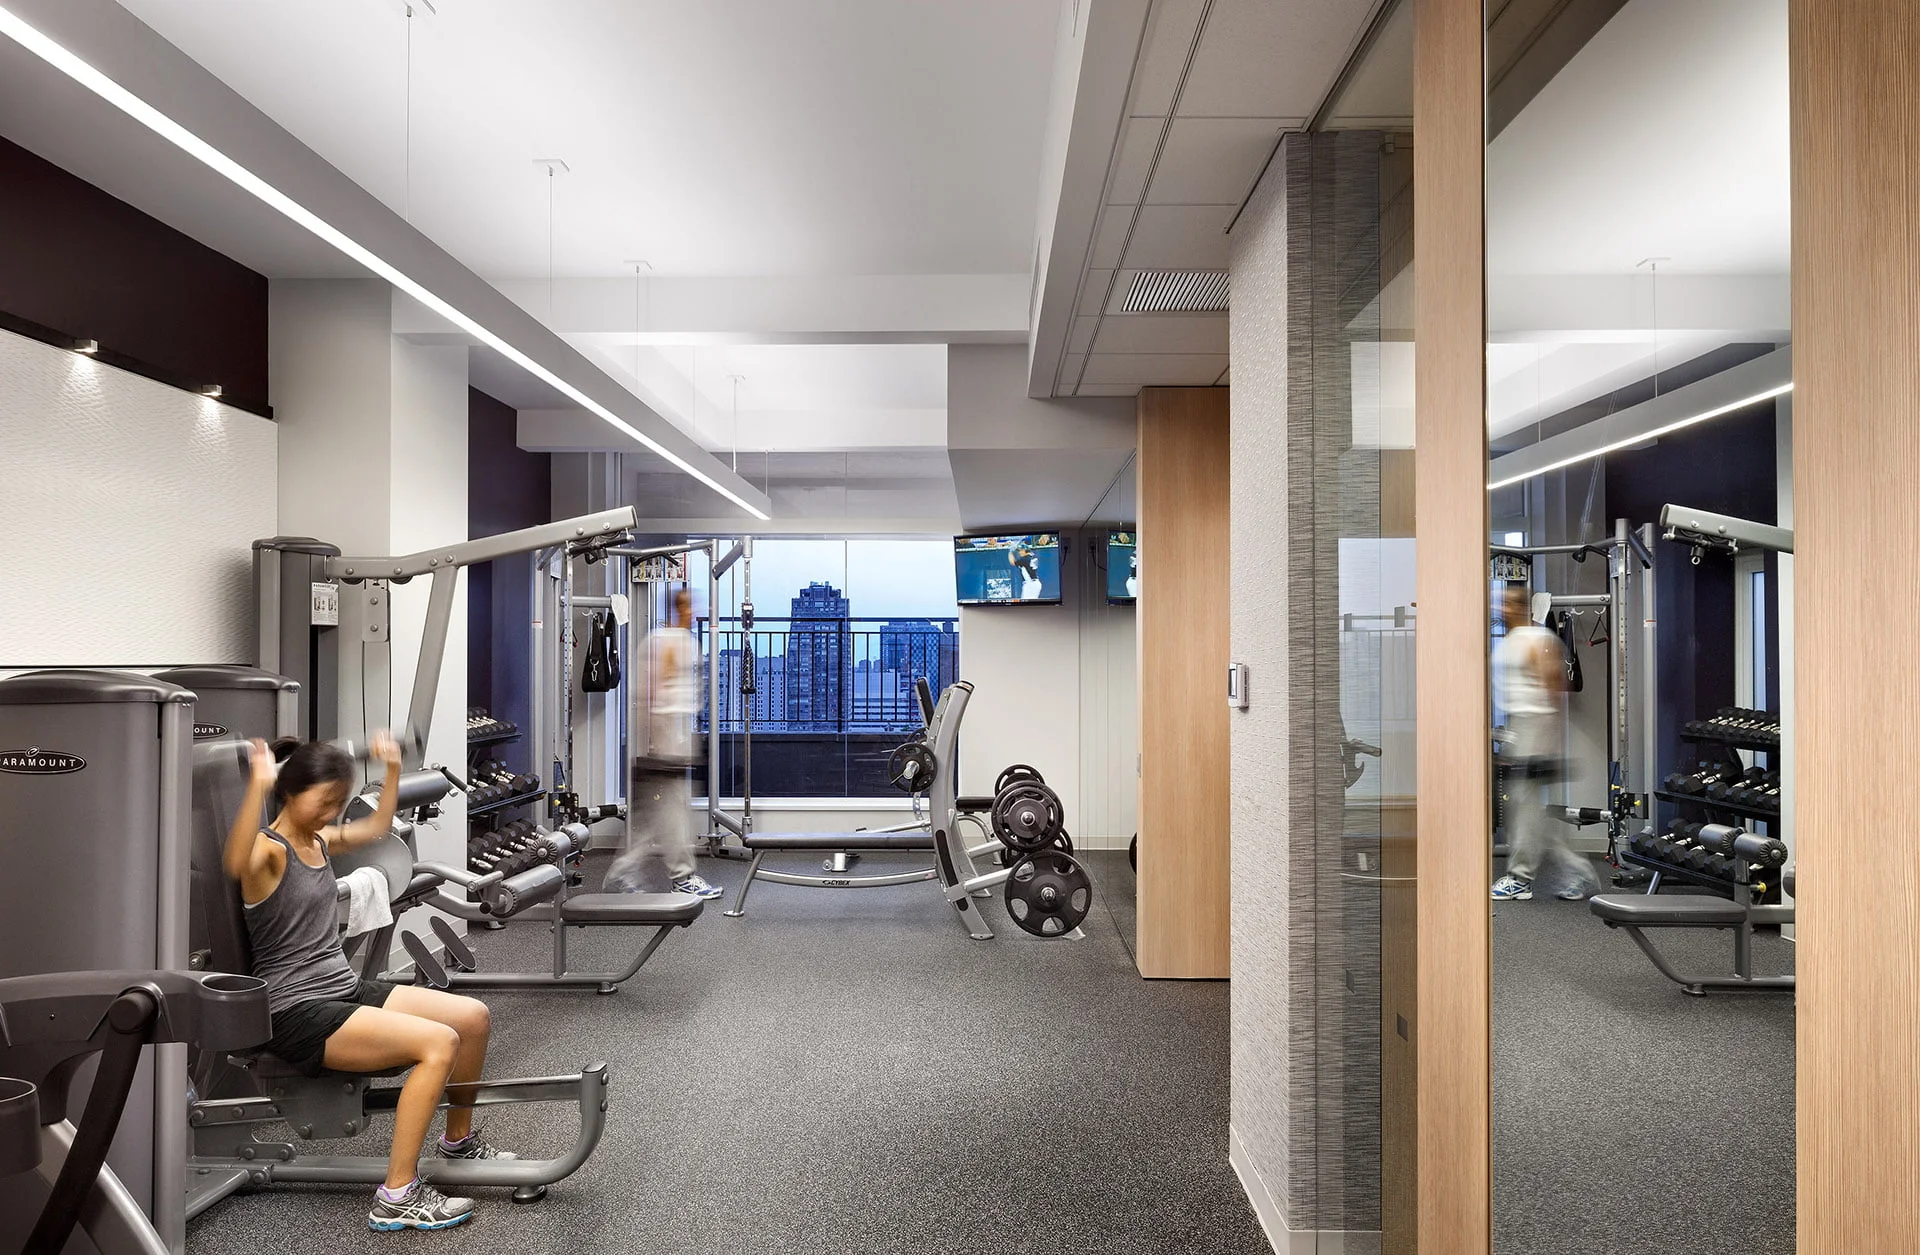 View of health club at Gracie Mews located at 401 East 80th Street.